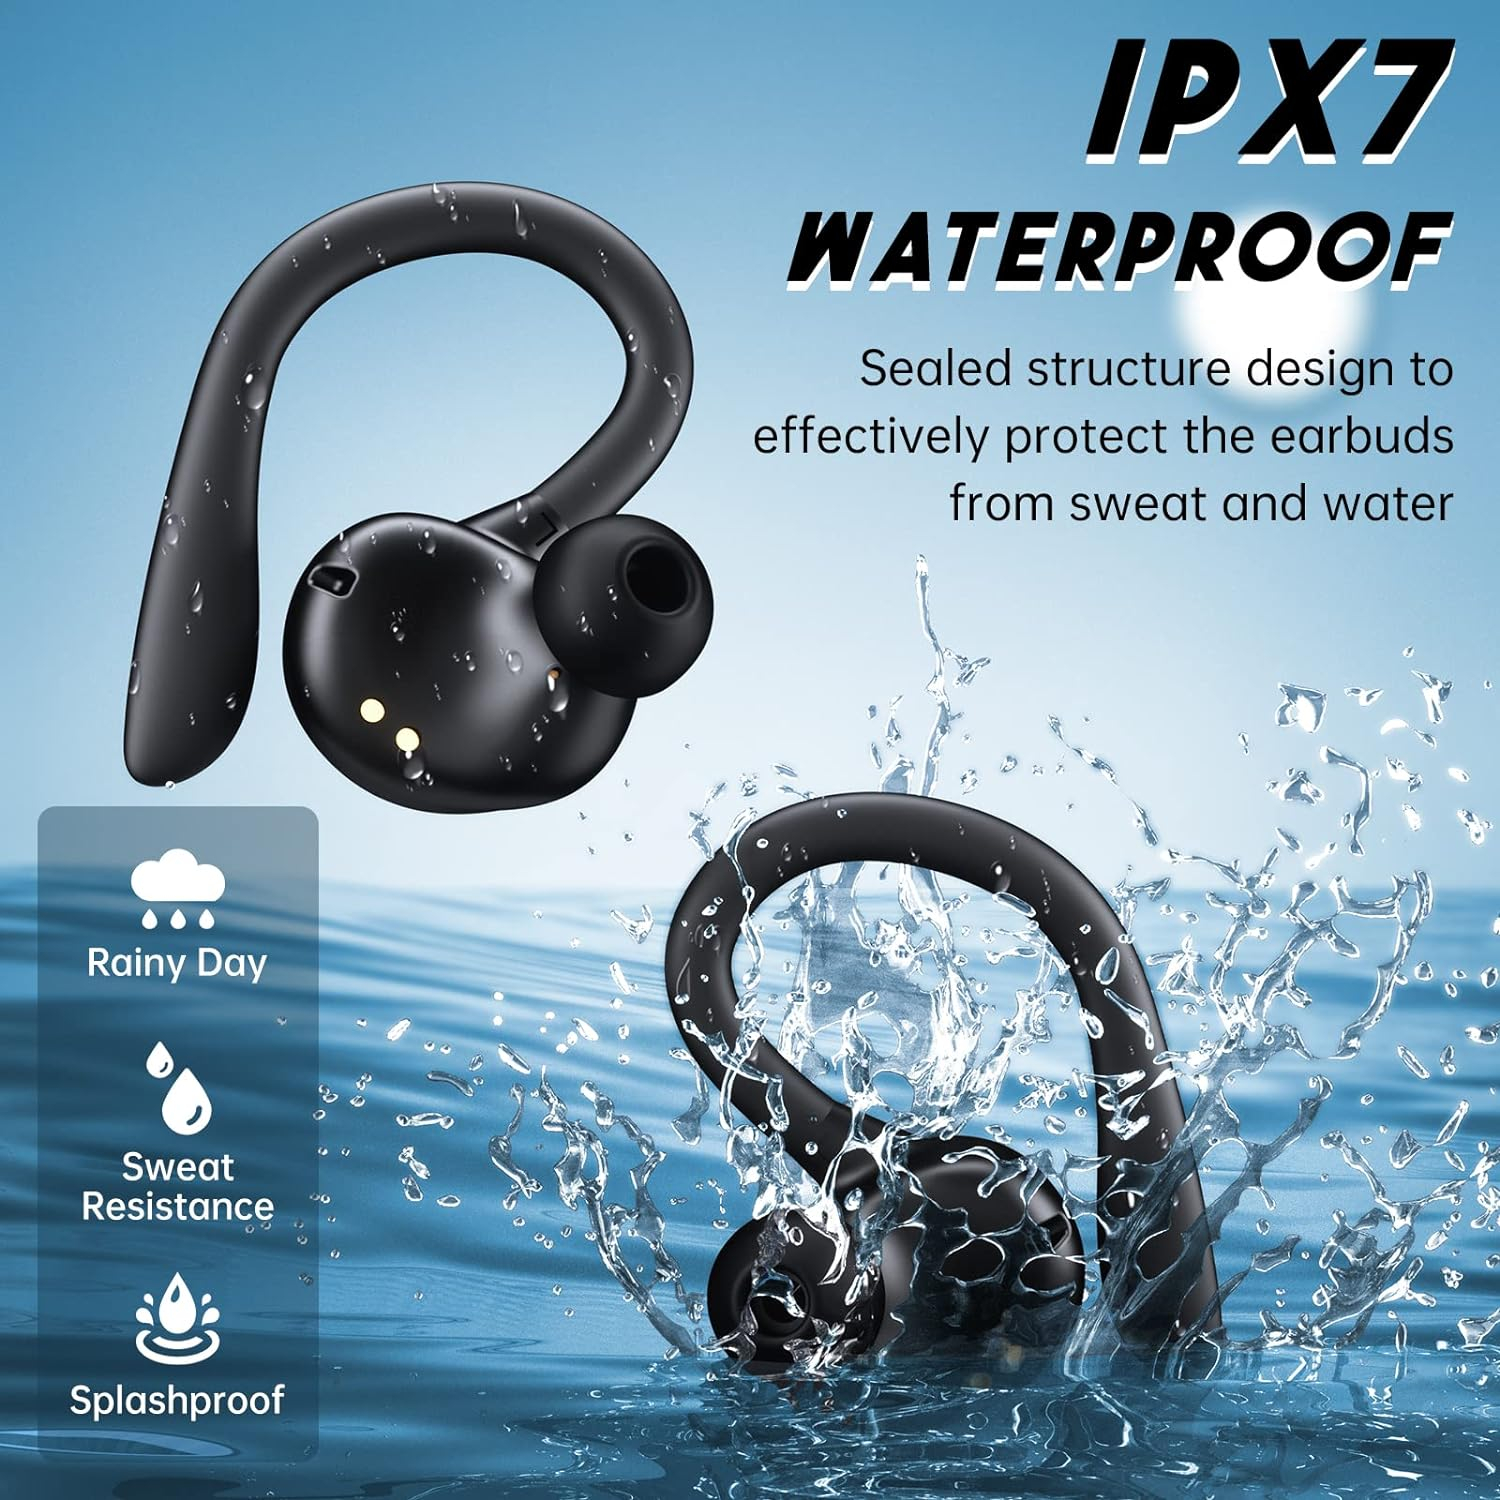 NANSON Headphones Wireless Earbuds 60hrs Playback IPX7 Waterproof Earphones Over-Ear Stereo Bass Headset with Earhooks Microphone LED Battery Display for Sports/Workout/Gym/Running Violet